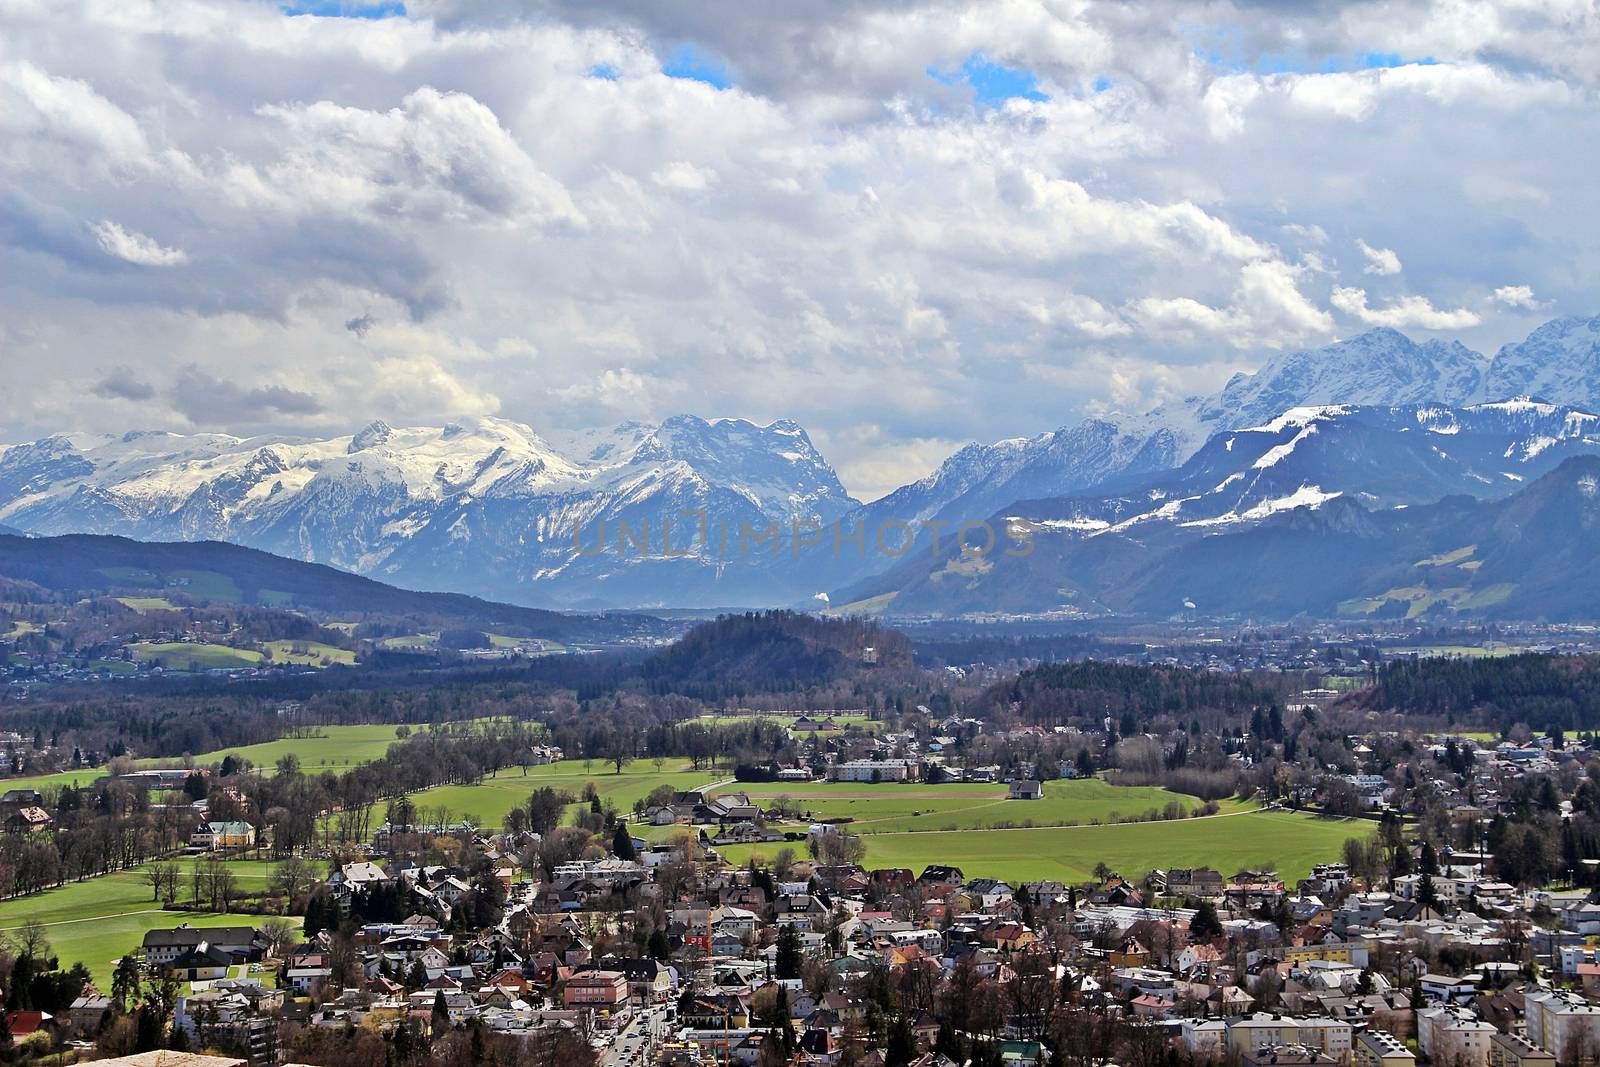 A stunning view from Salzburg castle. This city is surrounded by mountains with snow on top.